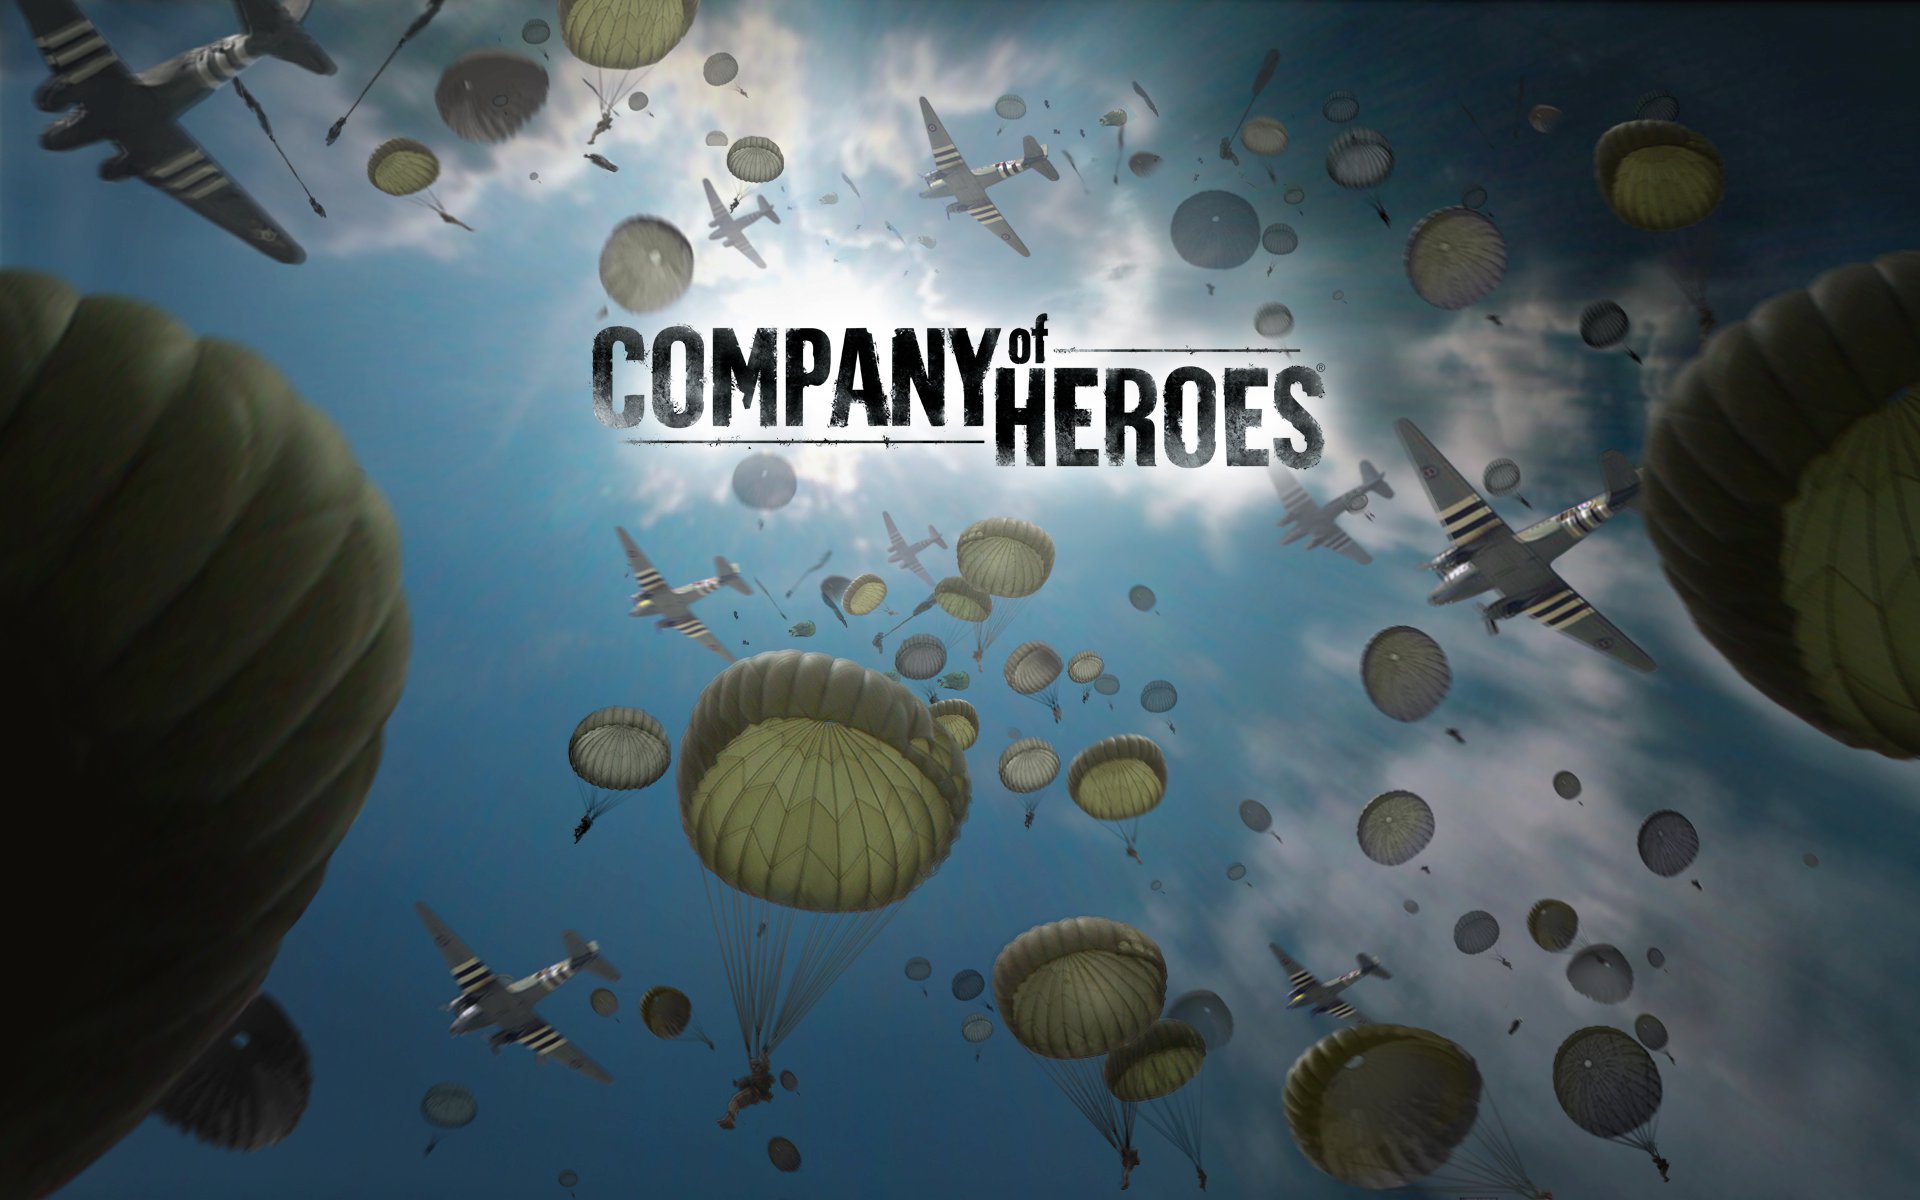 company of heroes 1 game crash on campaign selection